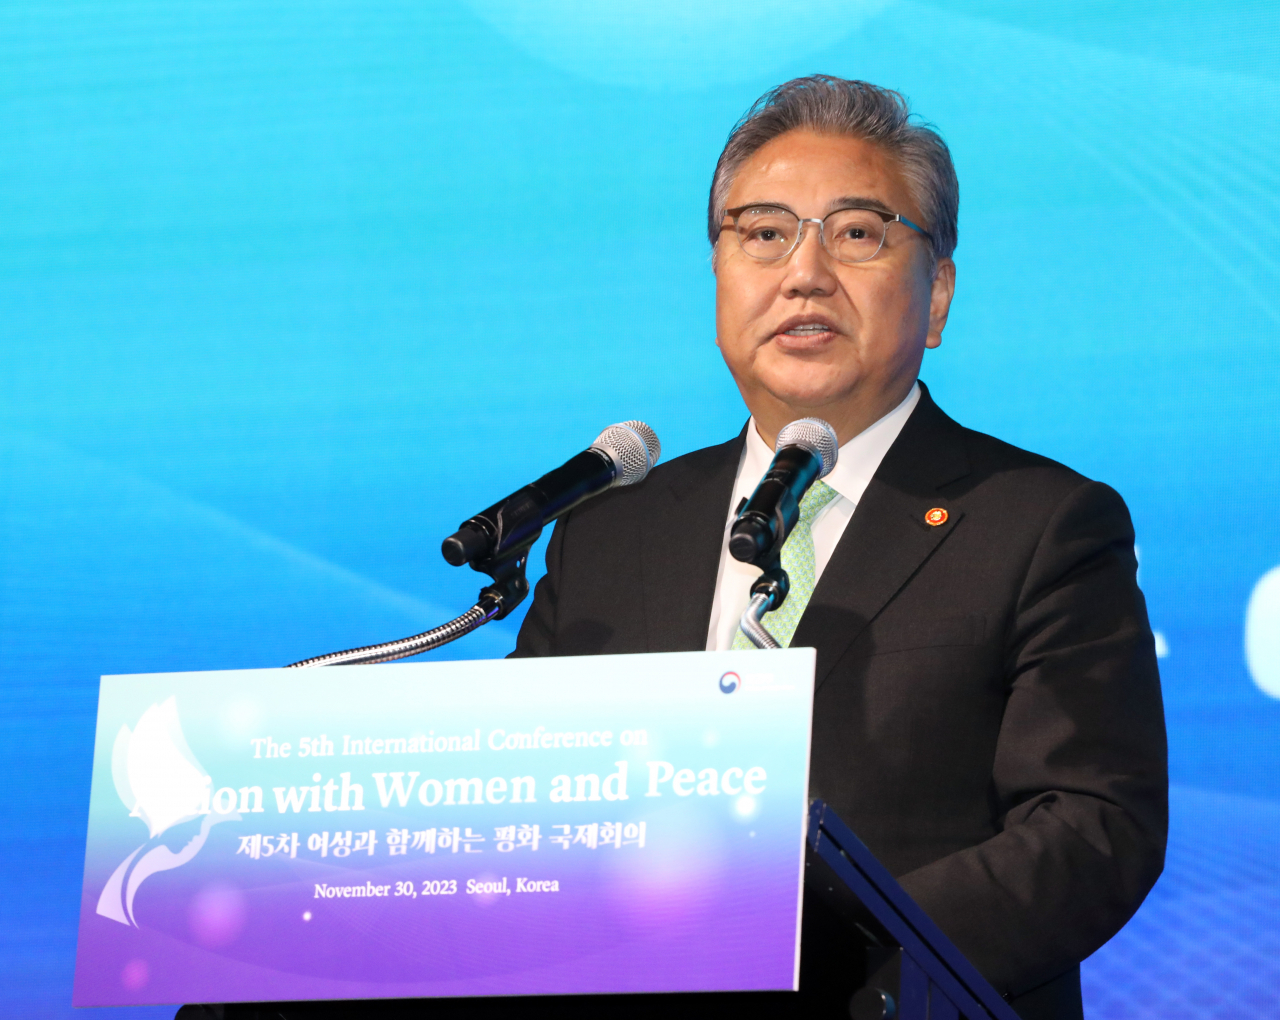 Foreign Minister Park Jin makes an opening speech at the 5th International Conference on Action with Women and Peace hosted by the foreign ministry in Seoul on Thursday. (Yonhap)